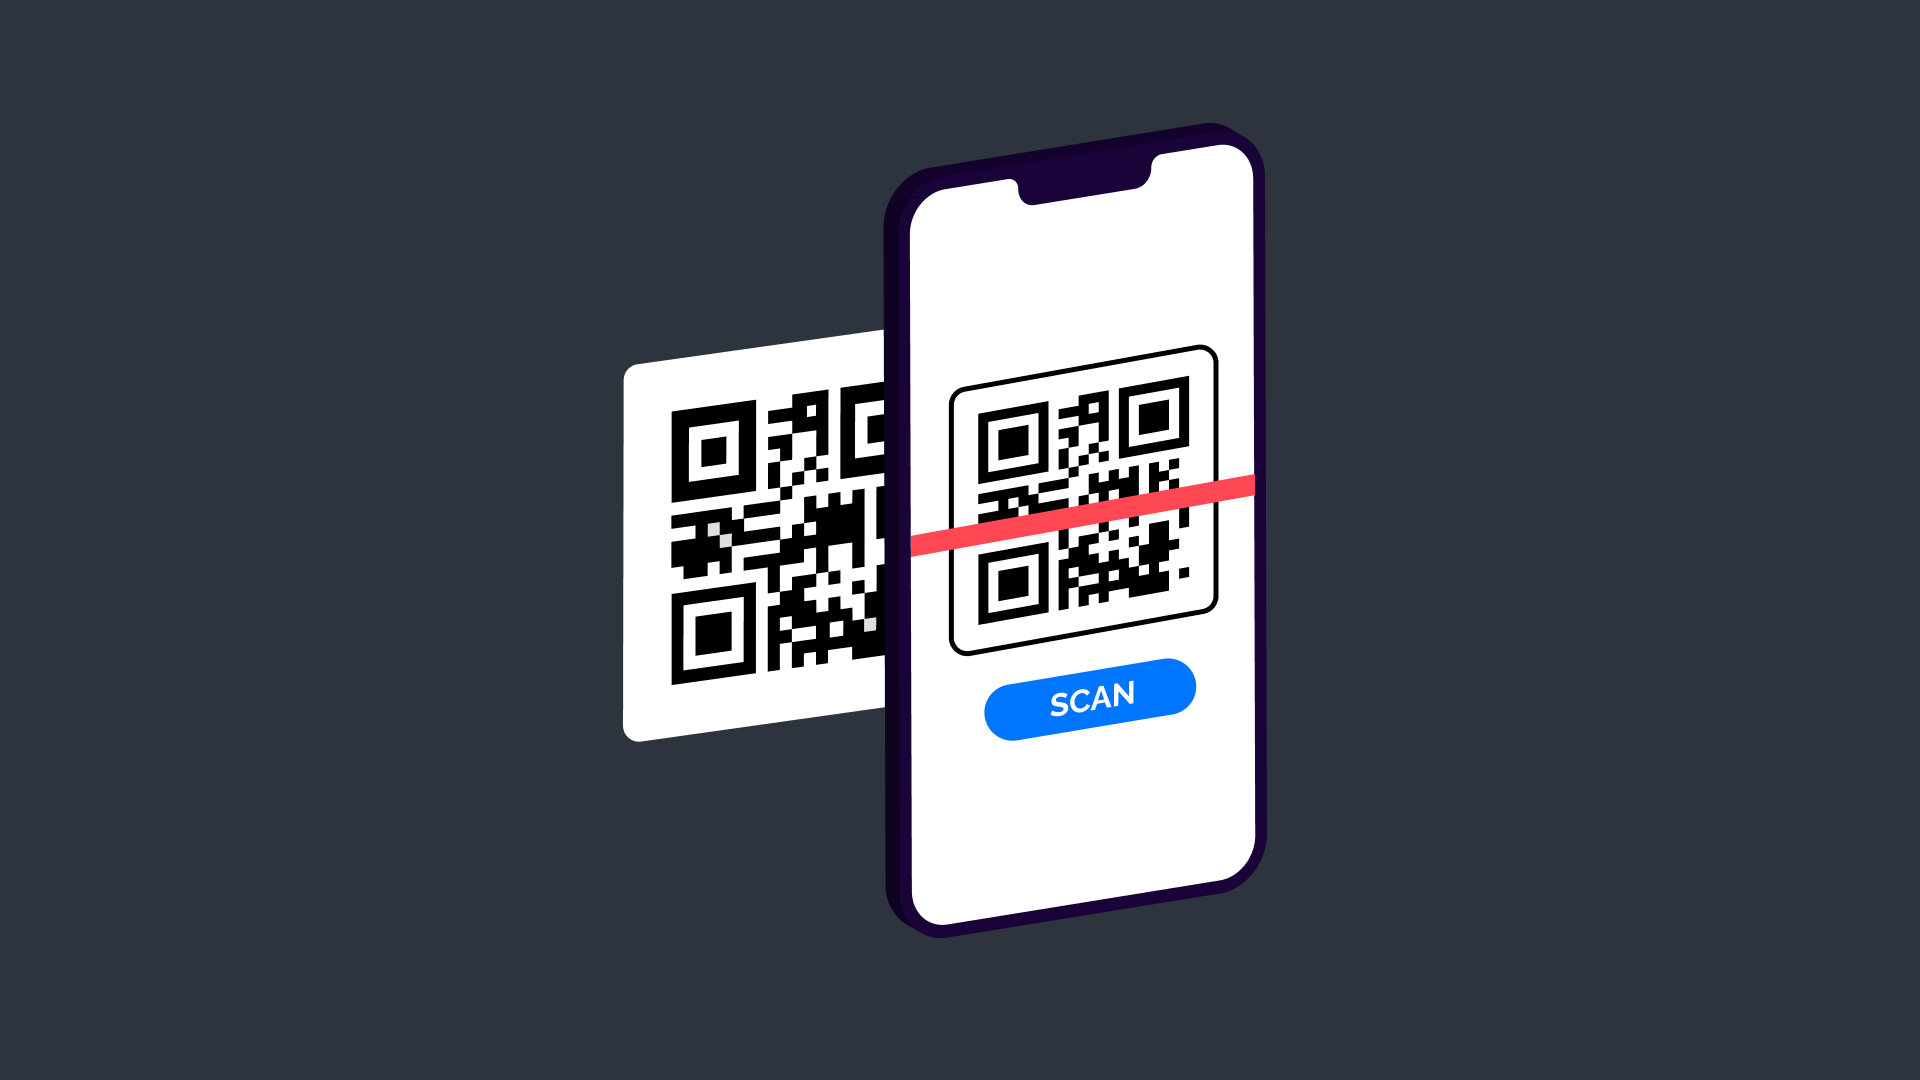 How to make Barcodes QR Code scanner apps | AppMaster